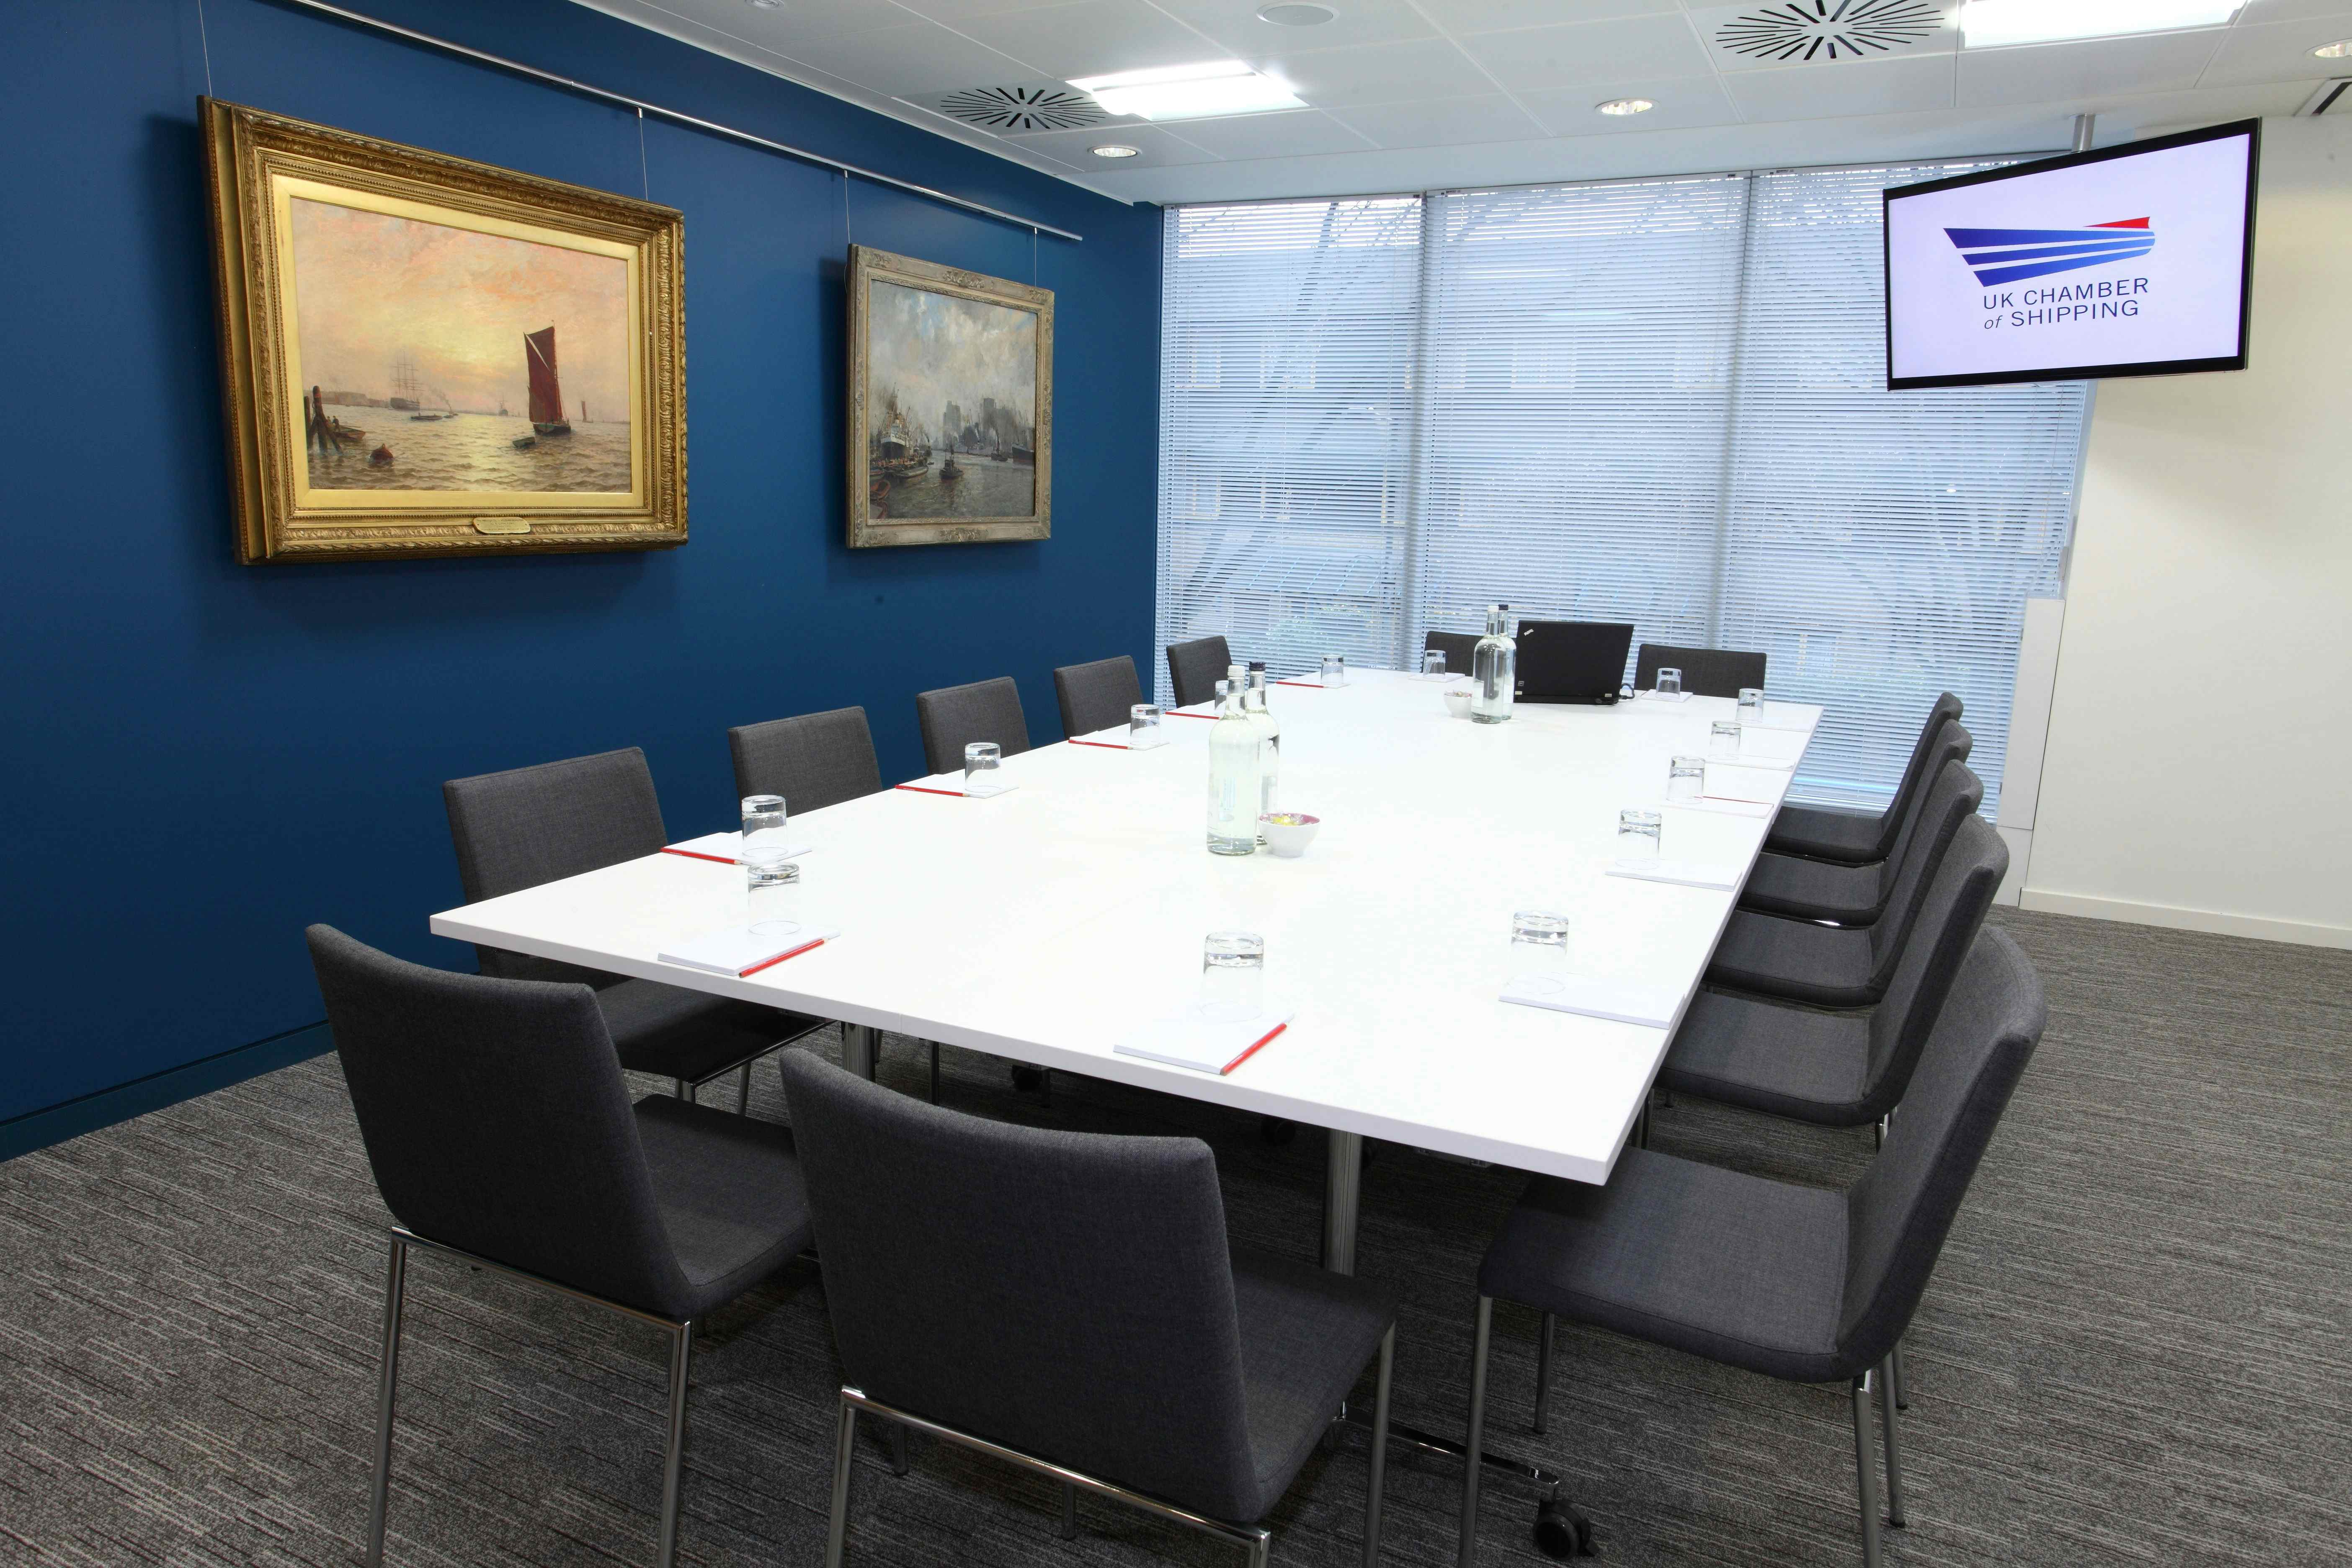 Meeting Room 1, UK Chamber of Shipping